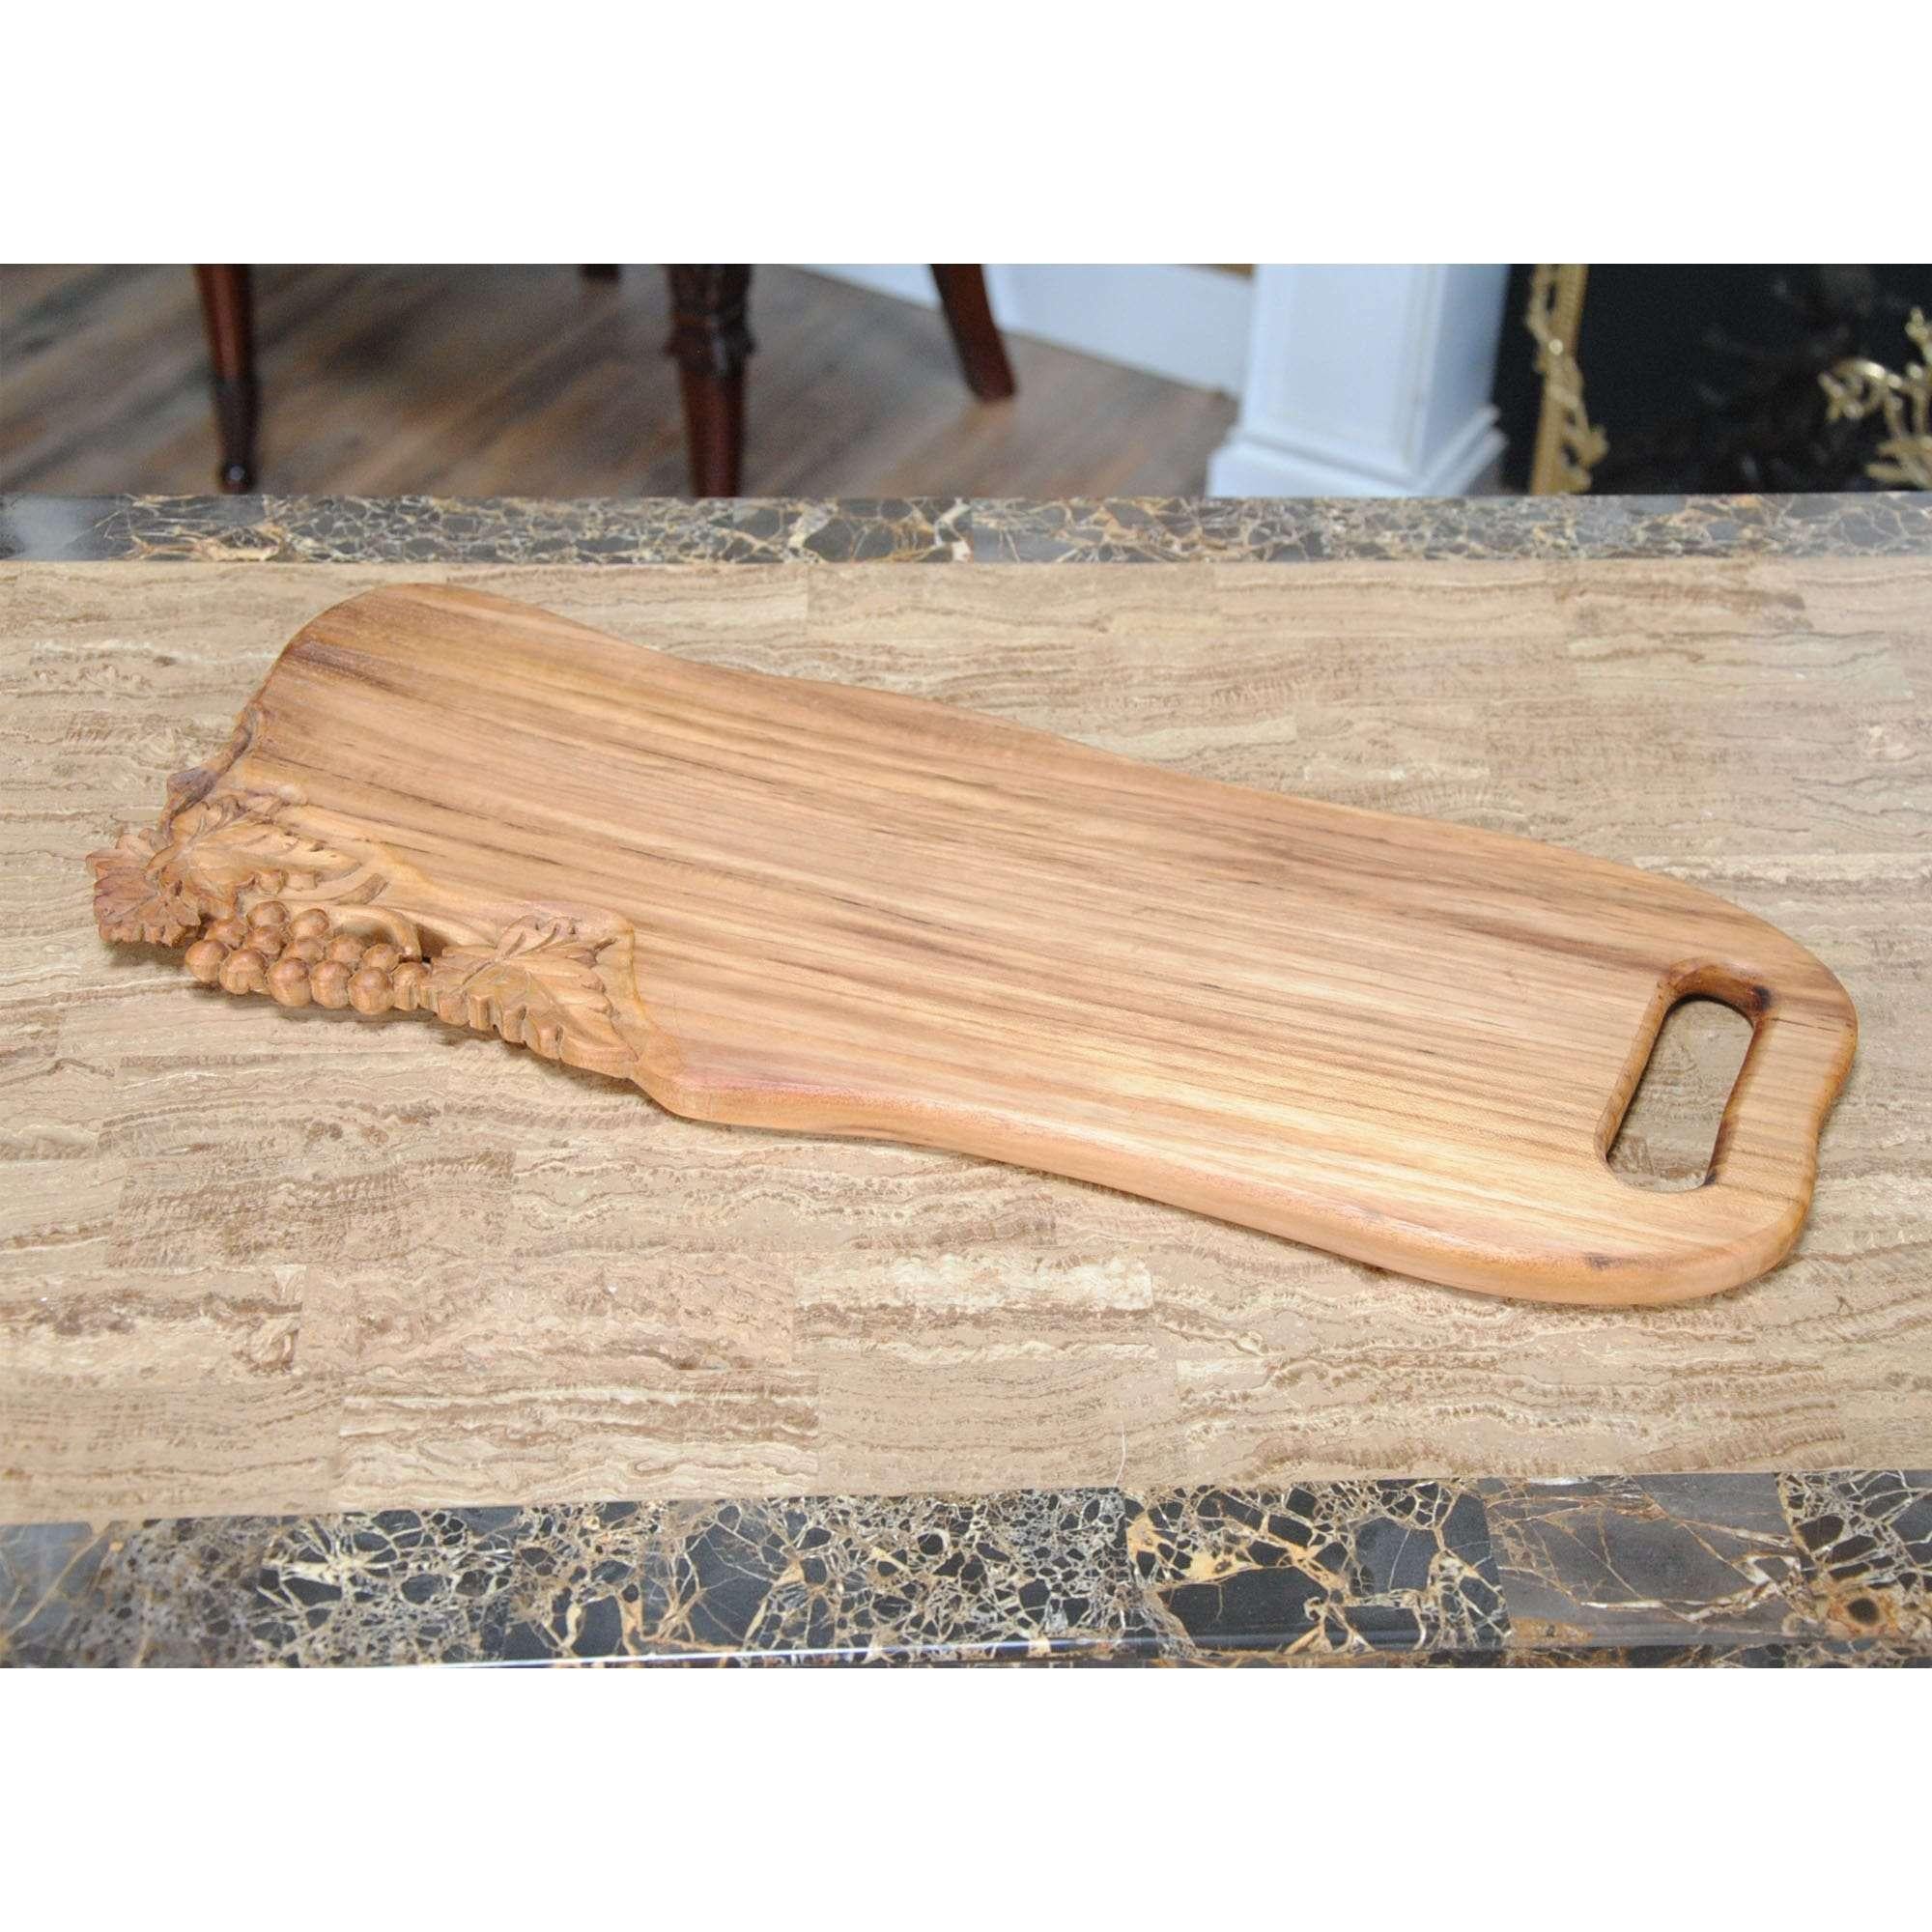 From Niagara Furniture, a Wave Shaped Teak Cutting Board with Grapes, produced from solid teak wood and featuring hand carved grape carvings. Use it to serve cheese and crackers along with your favorite wine. Teak cutting / serving board provides a